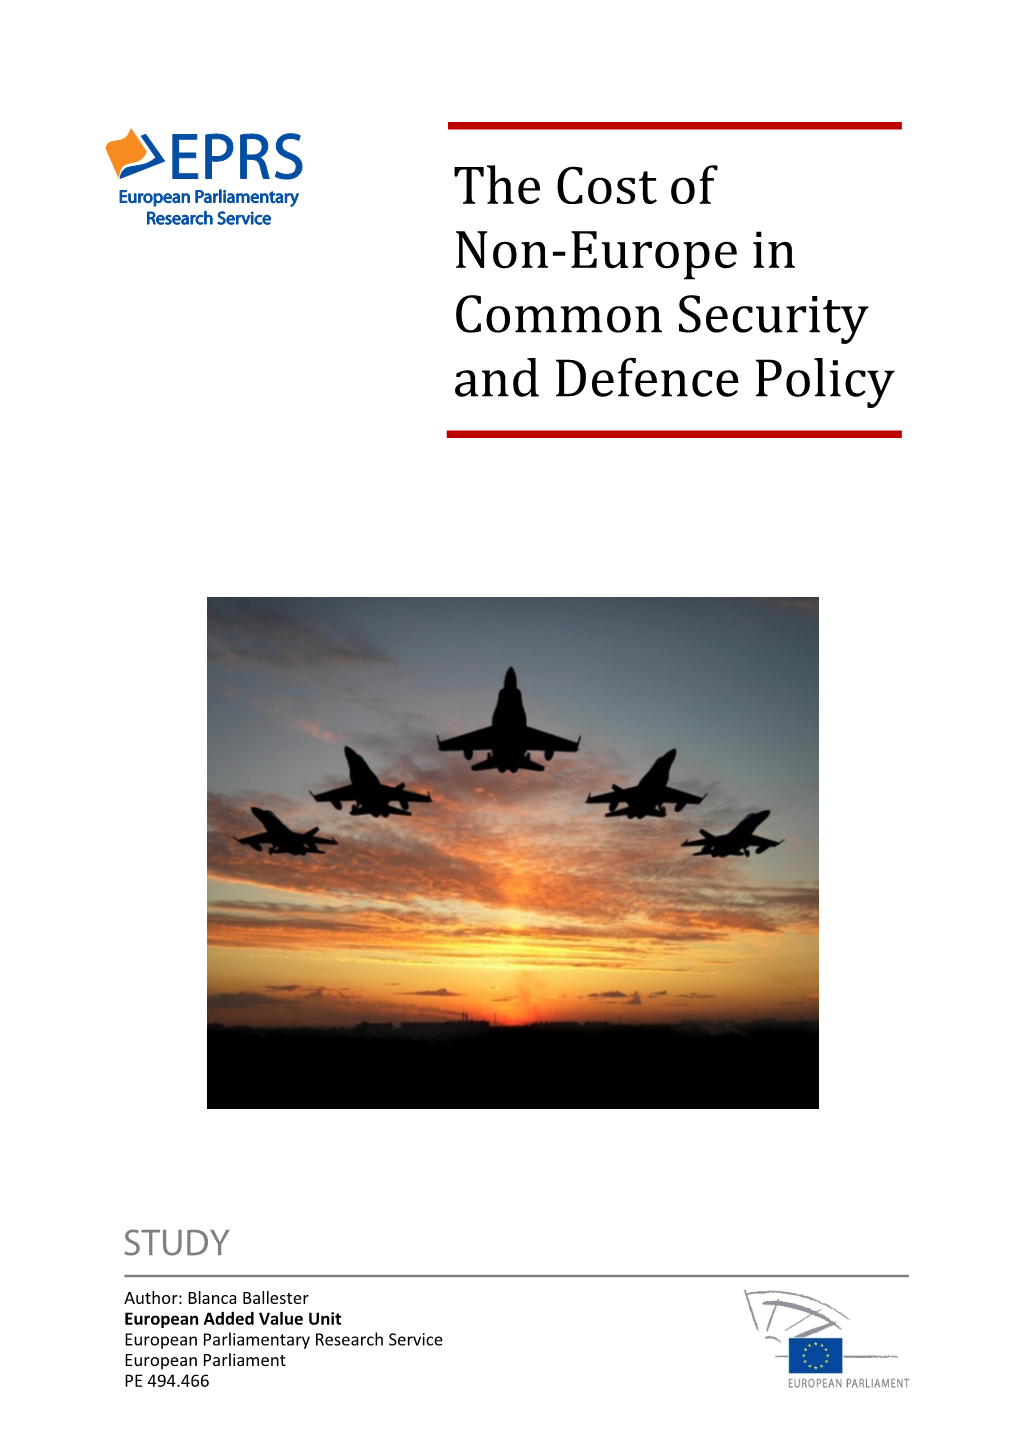 The Cost of Non-Europe in Common Security and Defence Policy